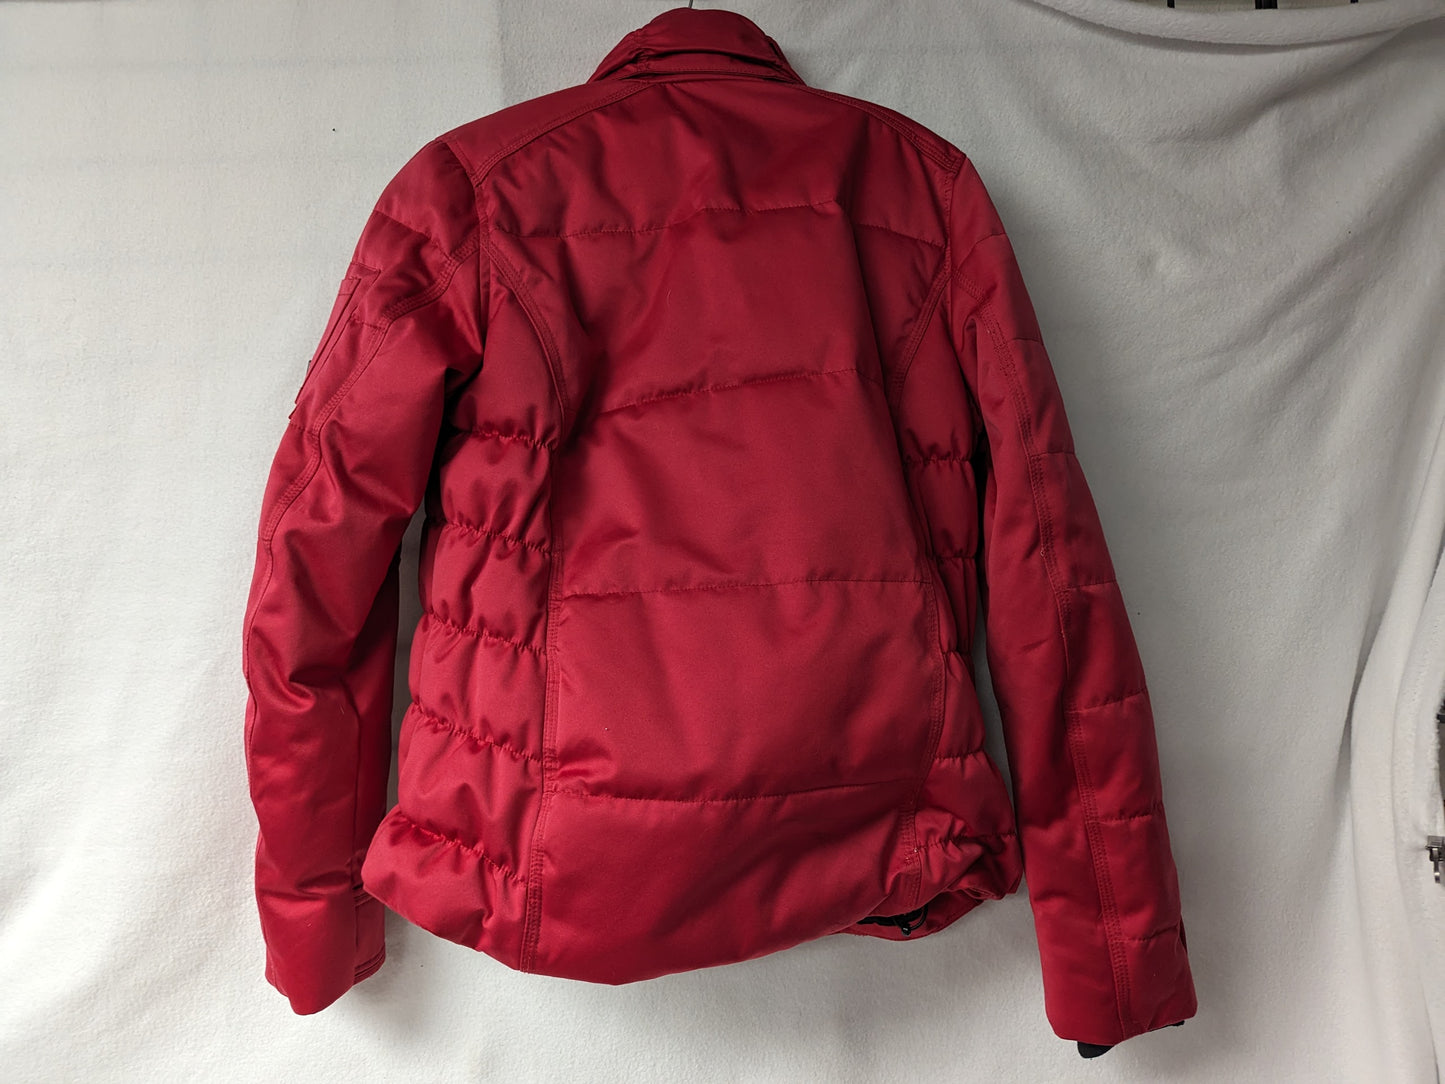 Obermeyer Lined Insulated Women's Ski/Snowboard Coat/Jacket Size Women Small Color Red Condition Used